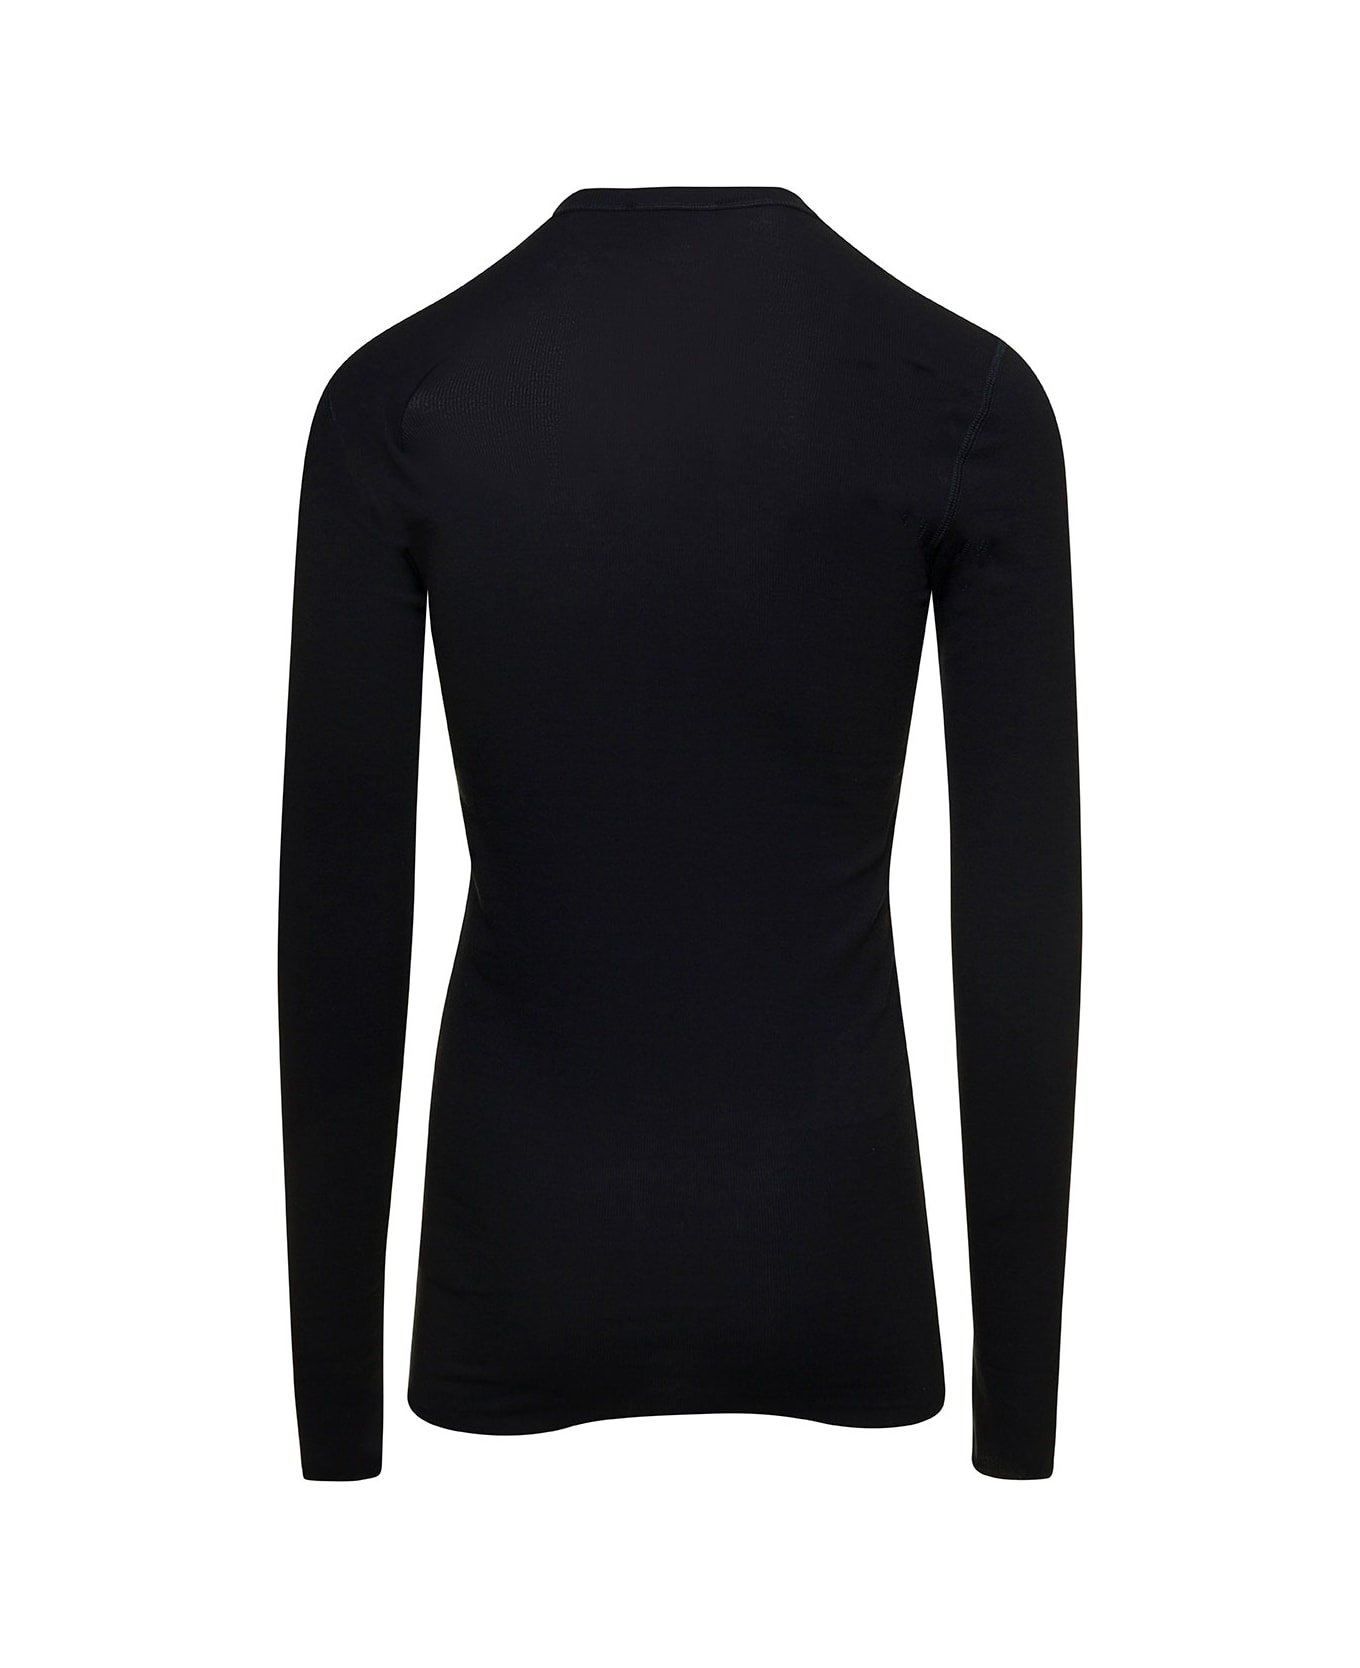 Dolce & Gabbana Black Long-sleeve Top With Button Fastening In Cotton Man - Black